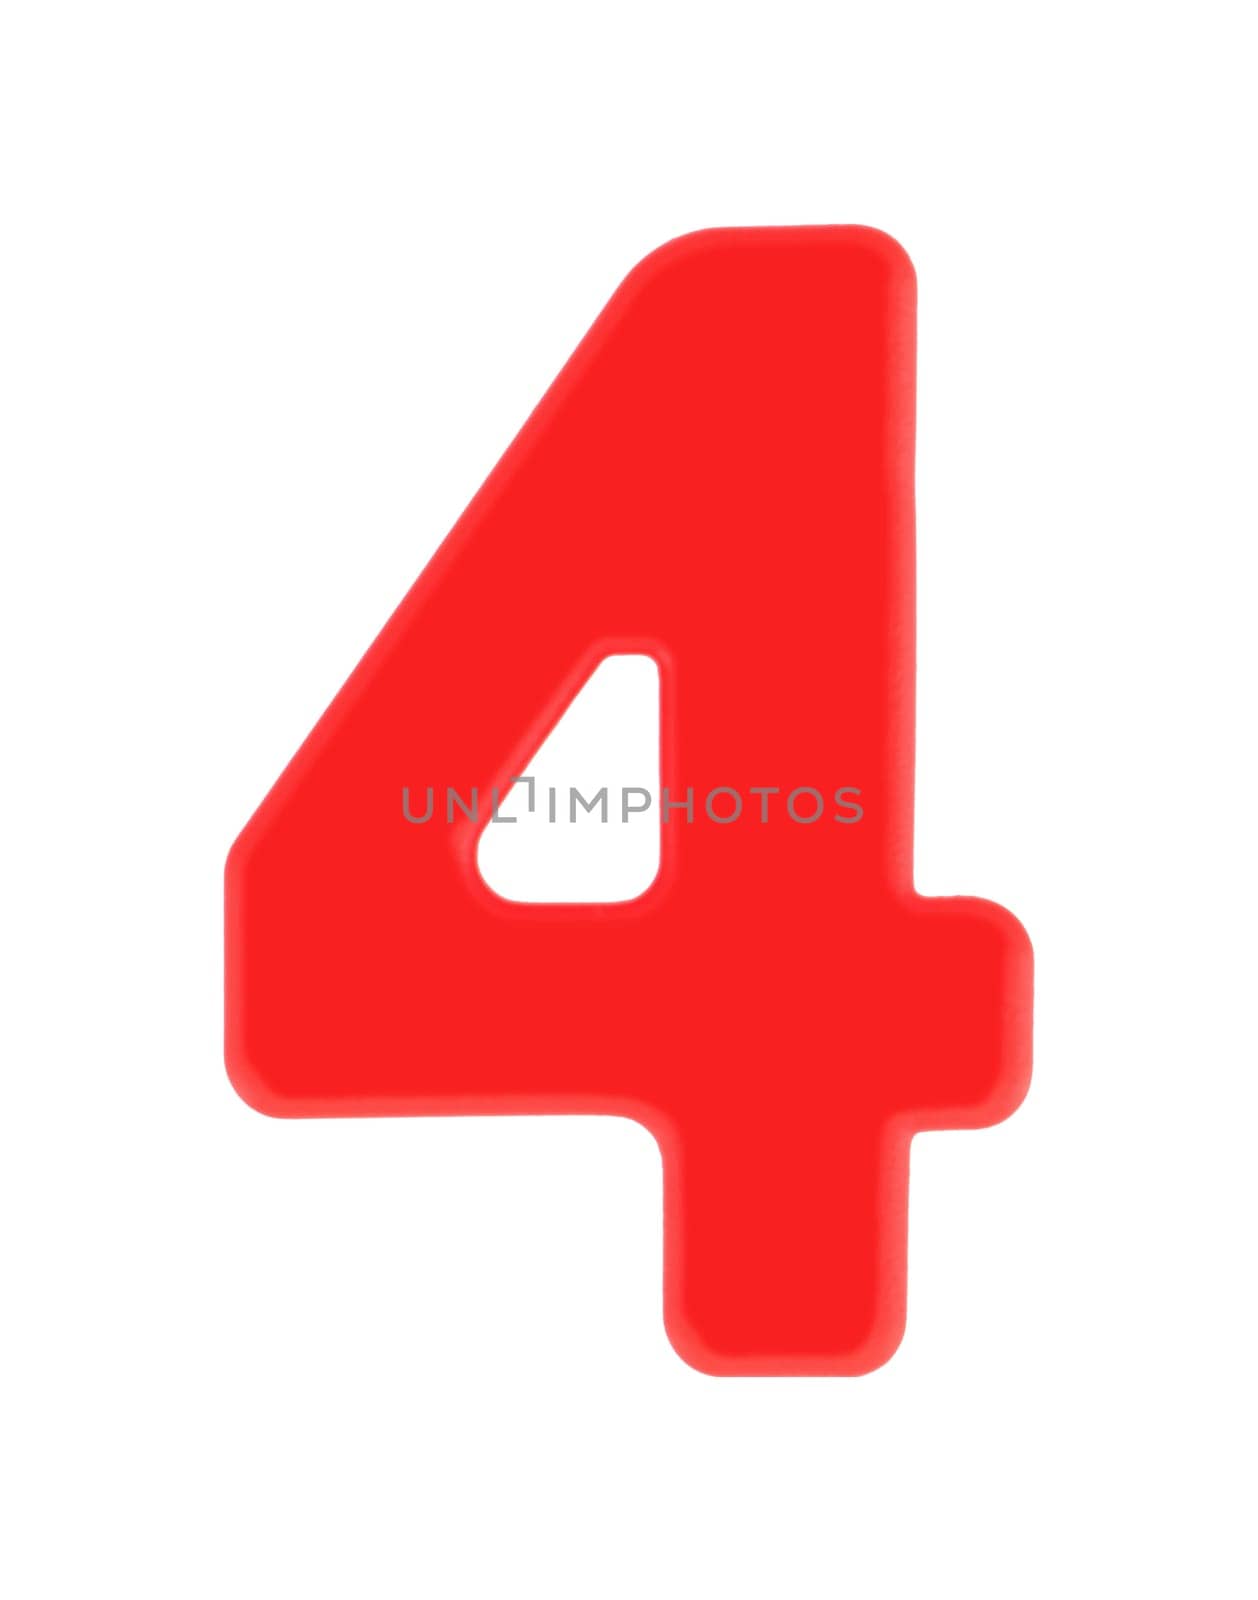 A 4 four magnetic letter on white with clipping path